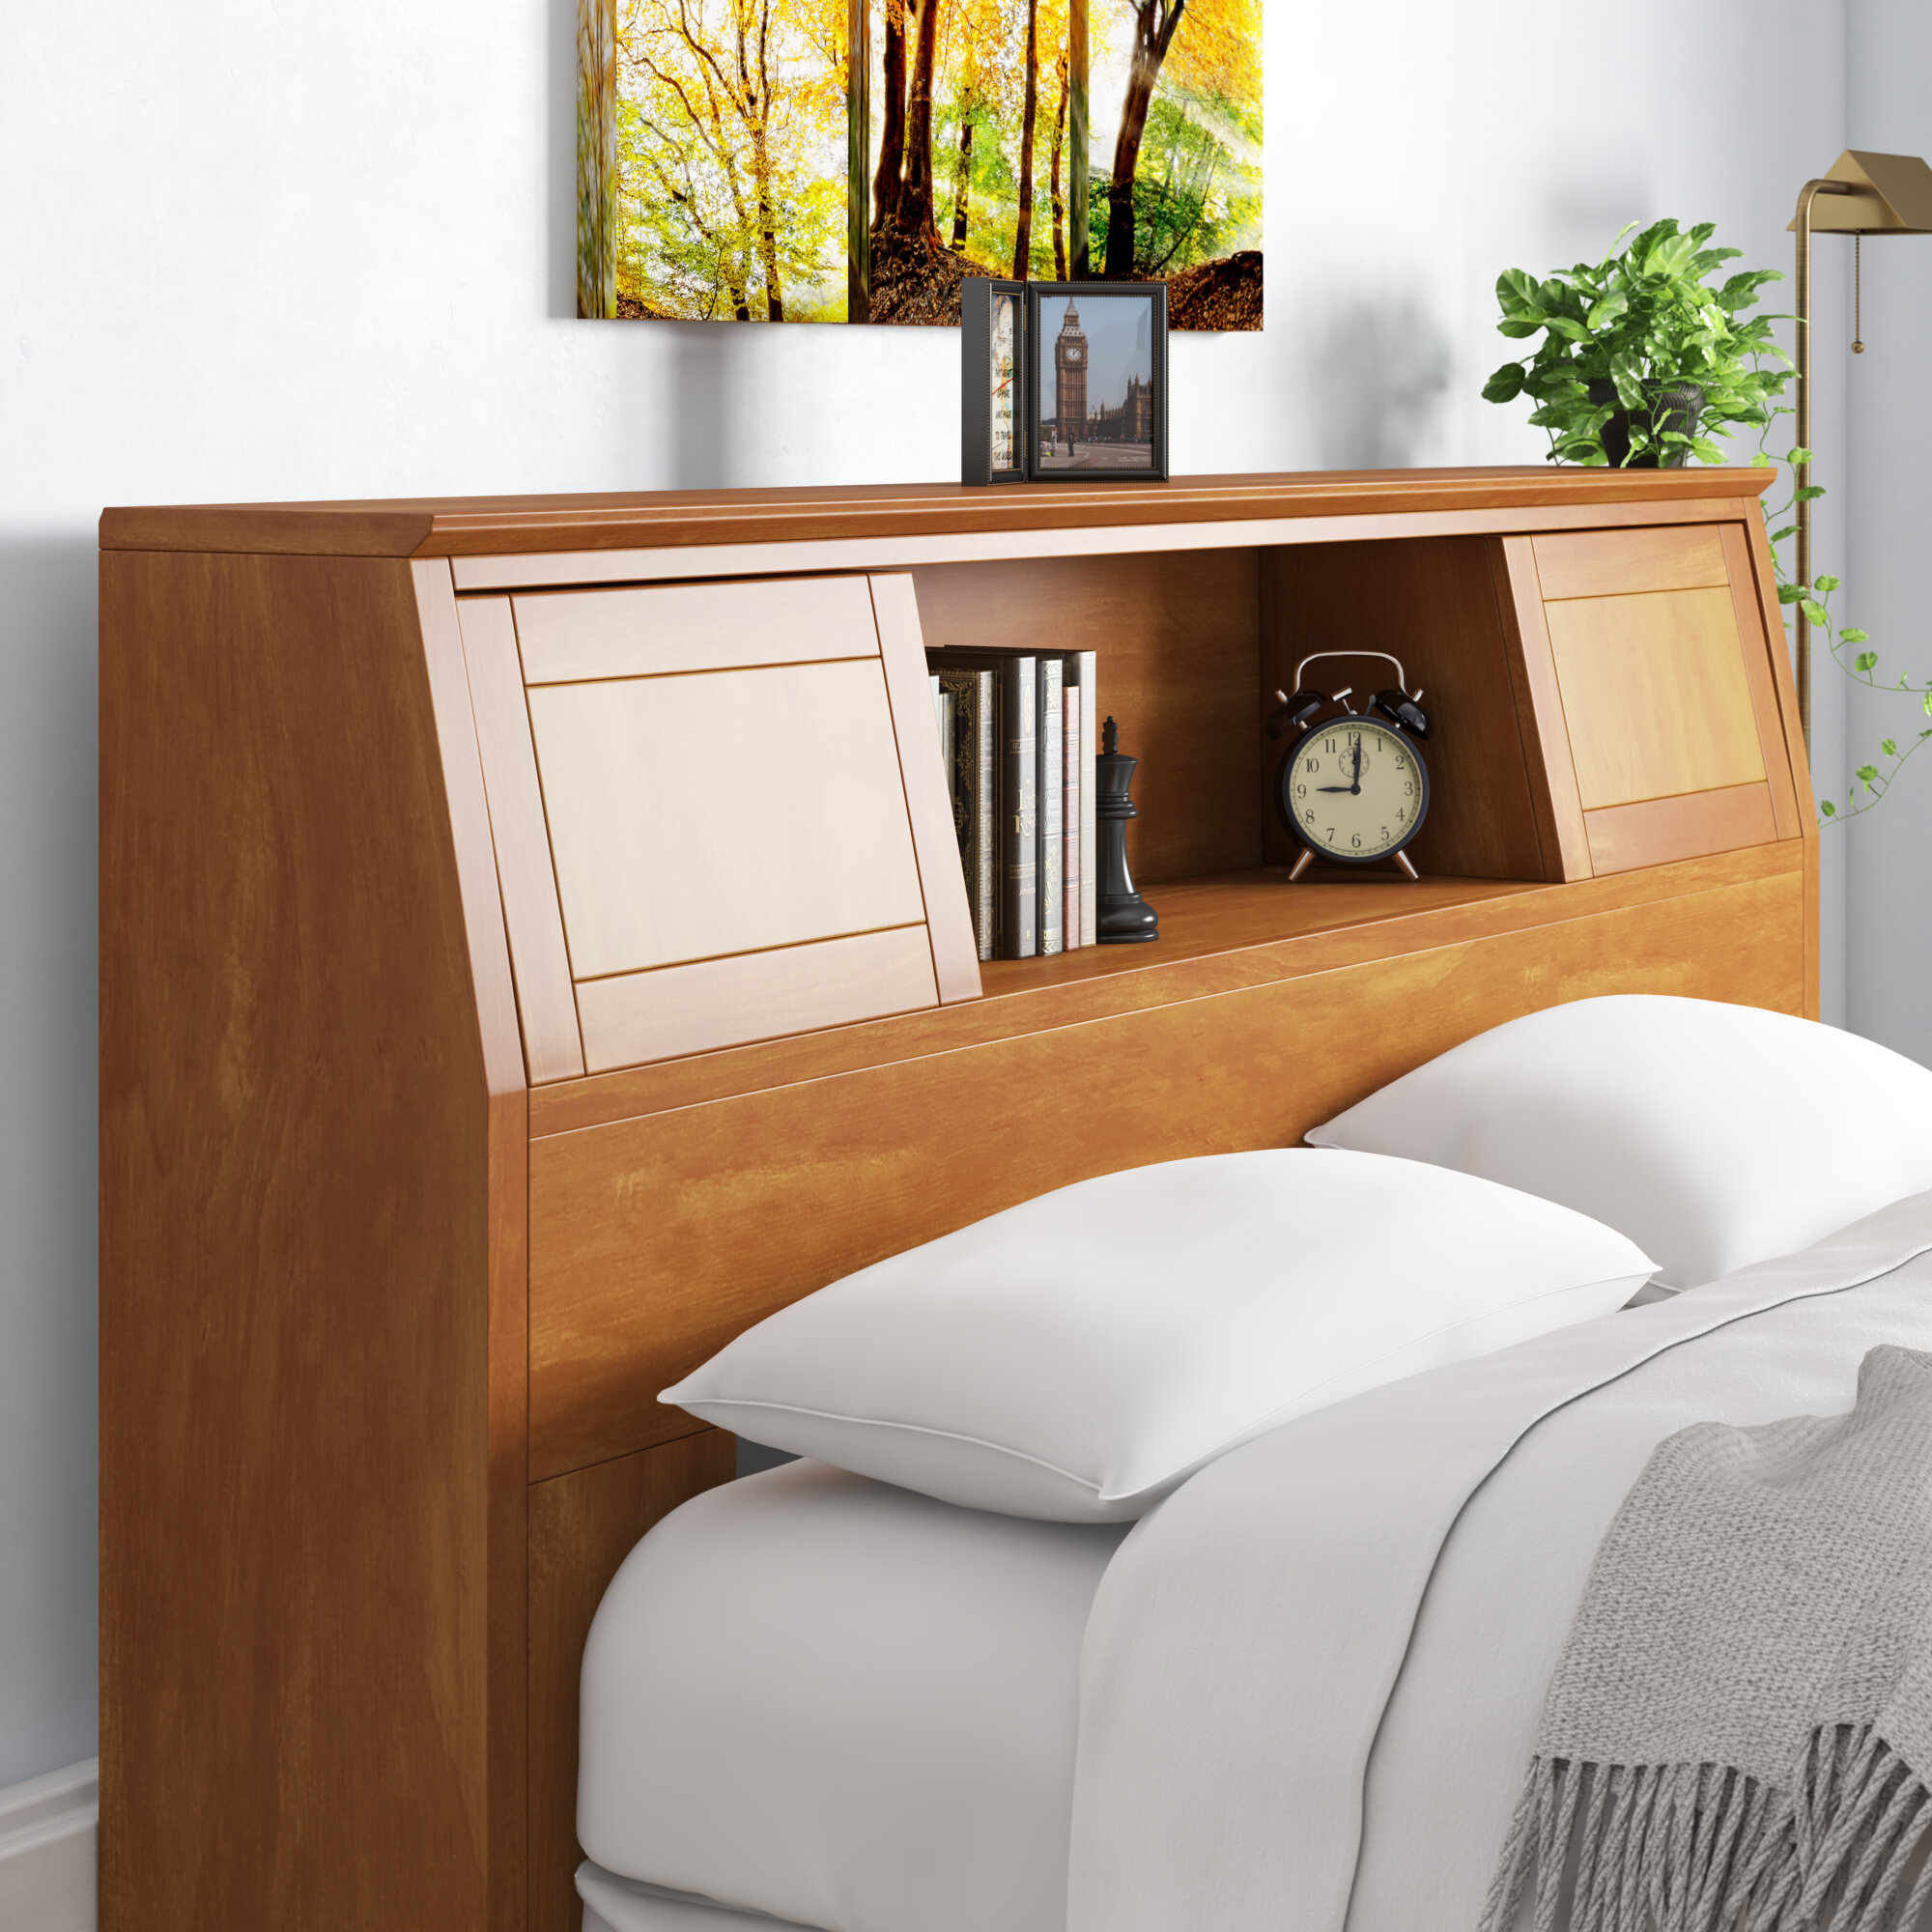 Featured image of post Real Wood Bookcase Headboard : Storage compartments for wood projects save money by repurposing pieces into custom creations.